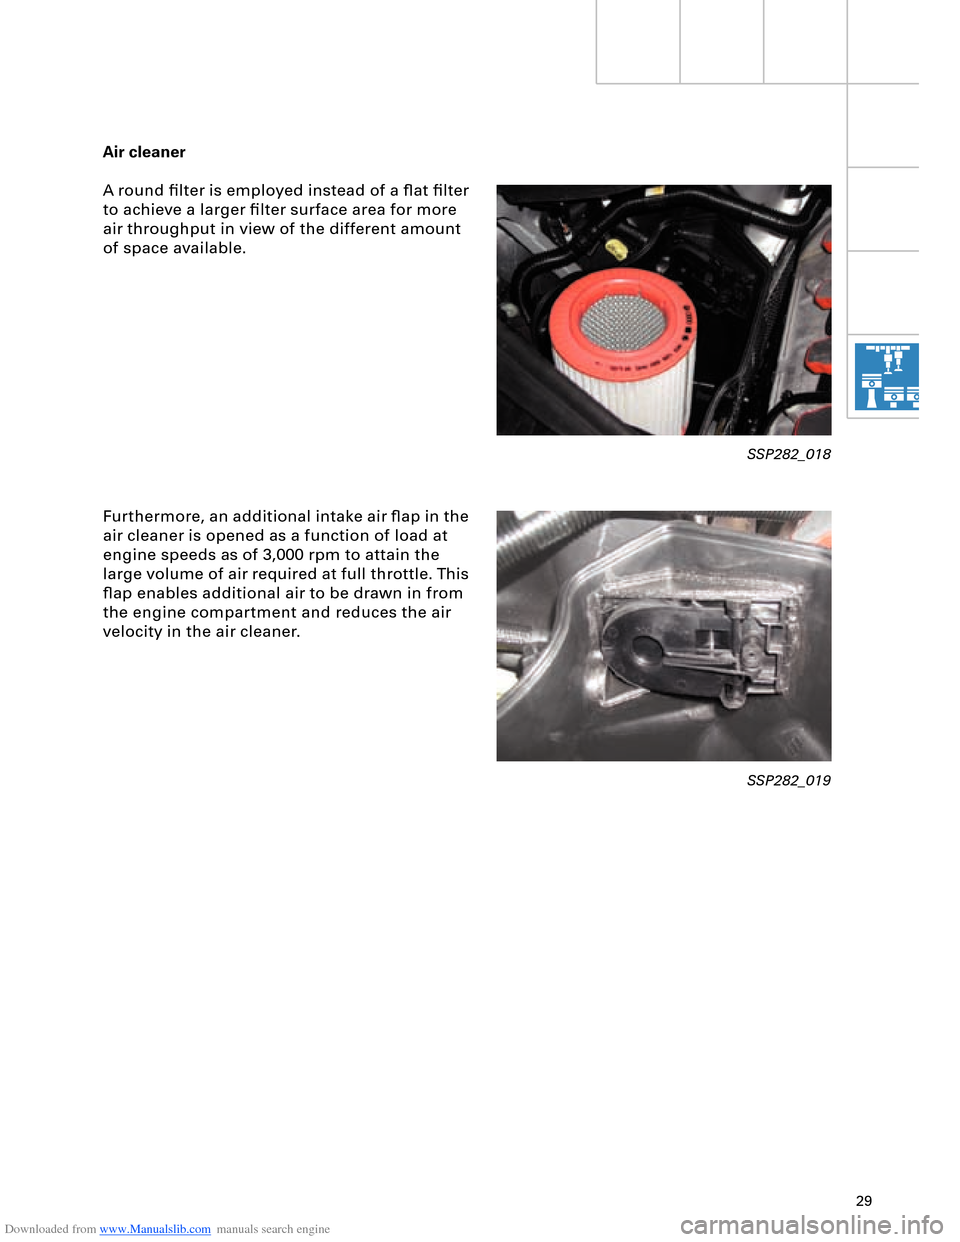 AUDI A8 2003 D3 / 2.G Technical Features Manual Downloaded from www.Manualslib.com manuals search engine 29
Air cleaner
A round ﬁlter is employed instead of a ﬂat ﬁlter 
to achieve a larger ﬁlter surface area for more 
air throughput in vie